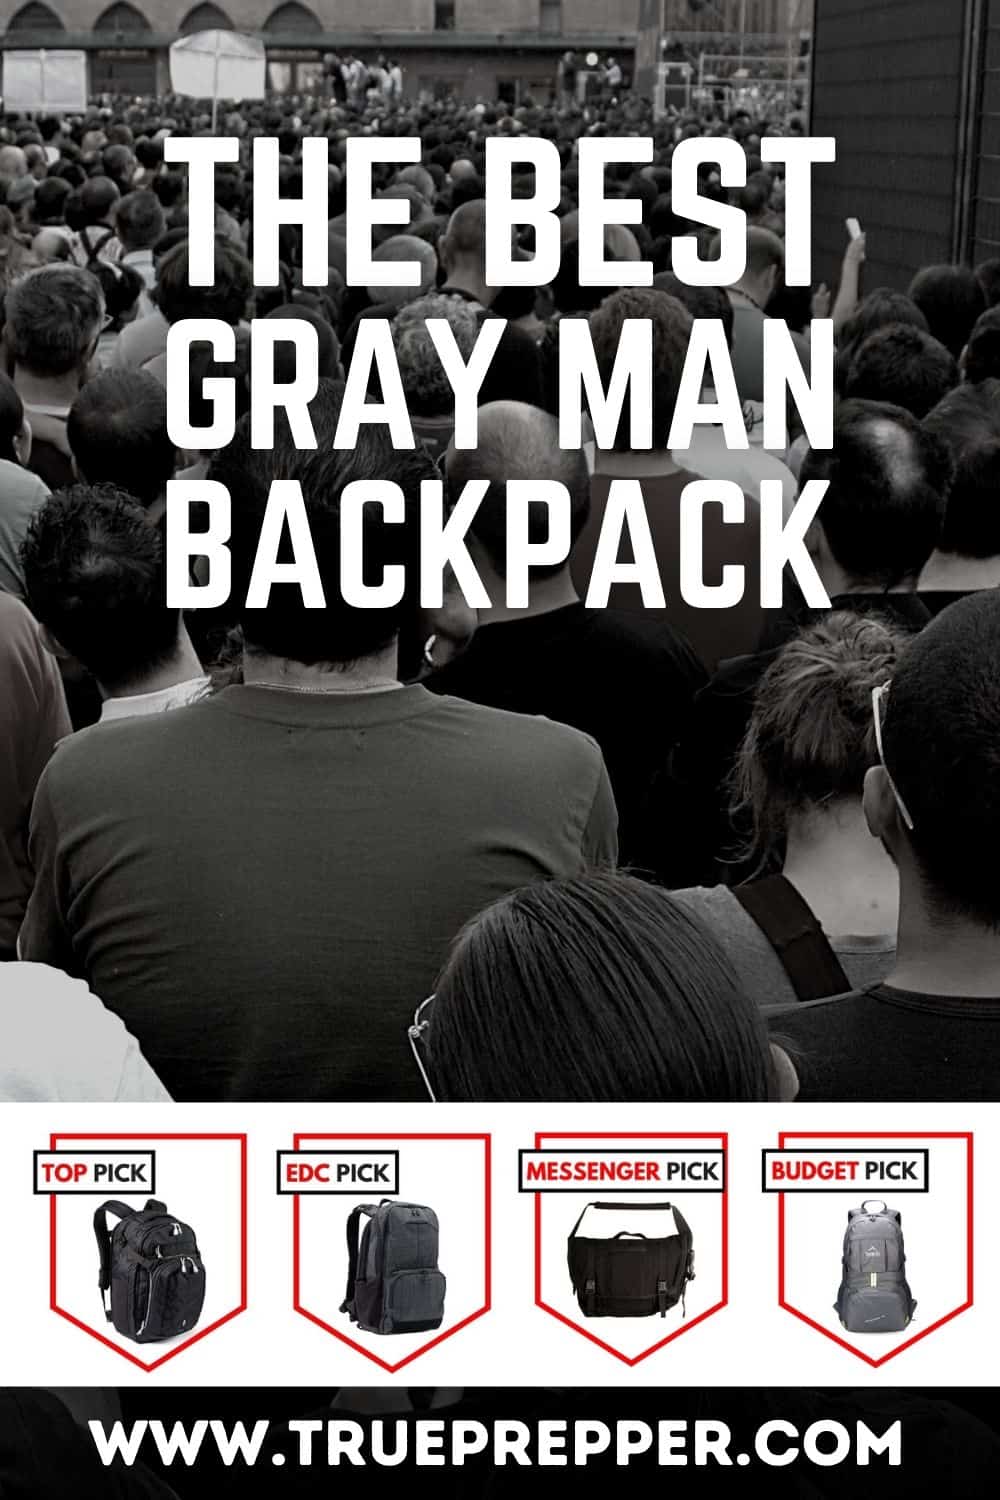 The Best Gray Man Backpack